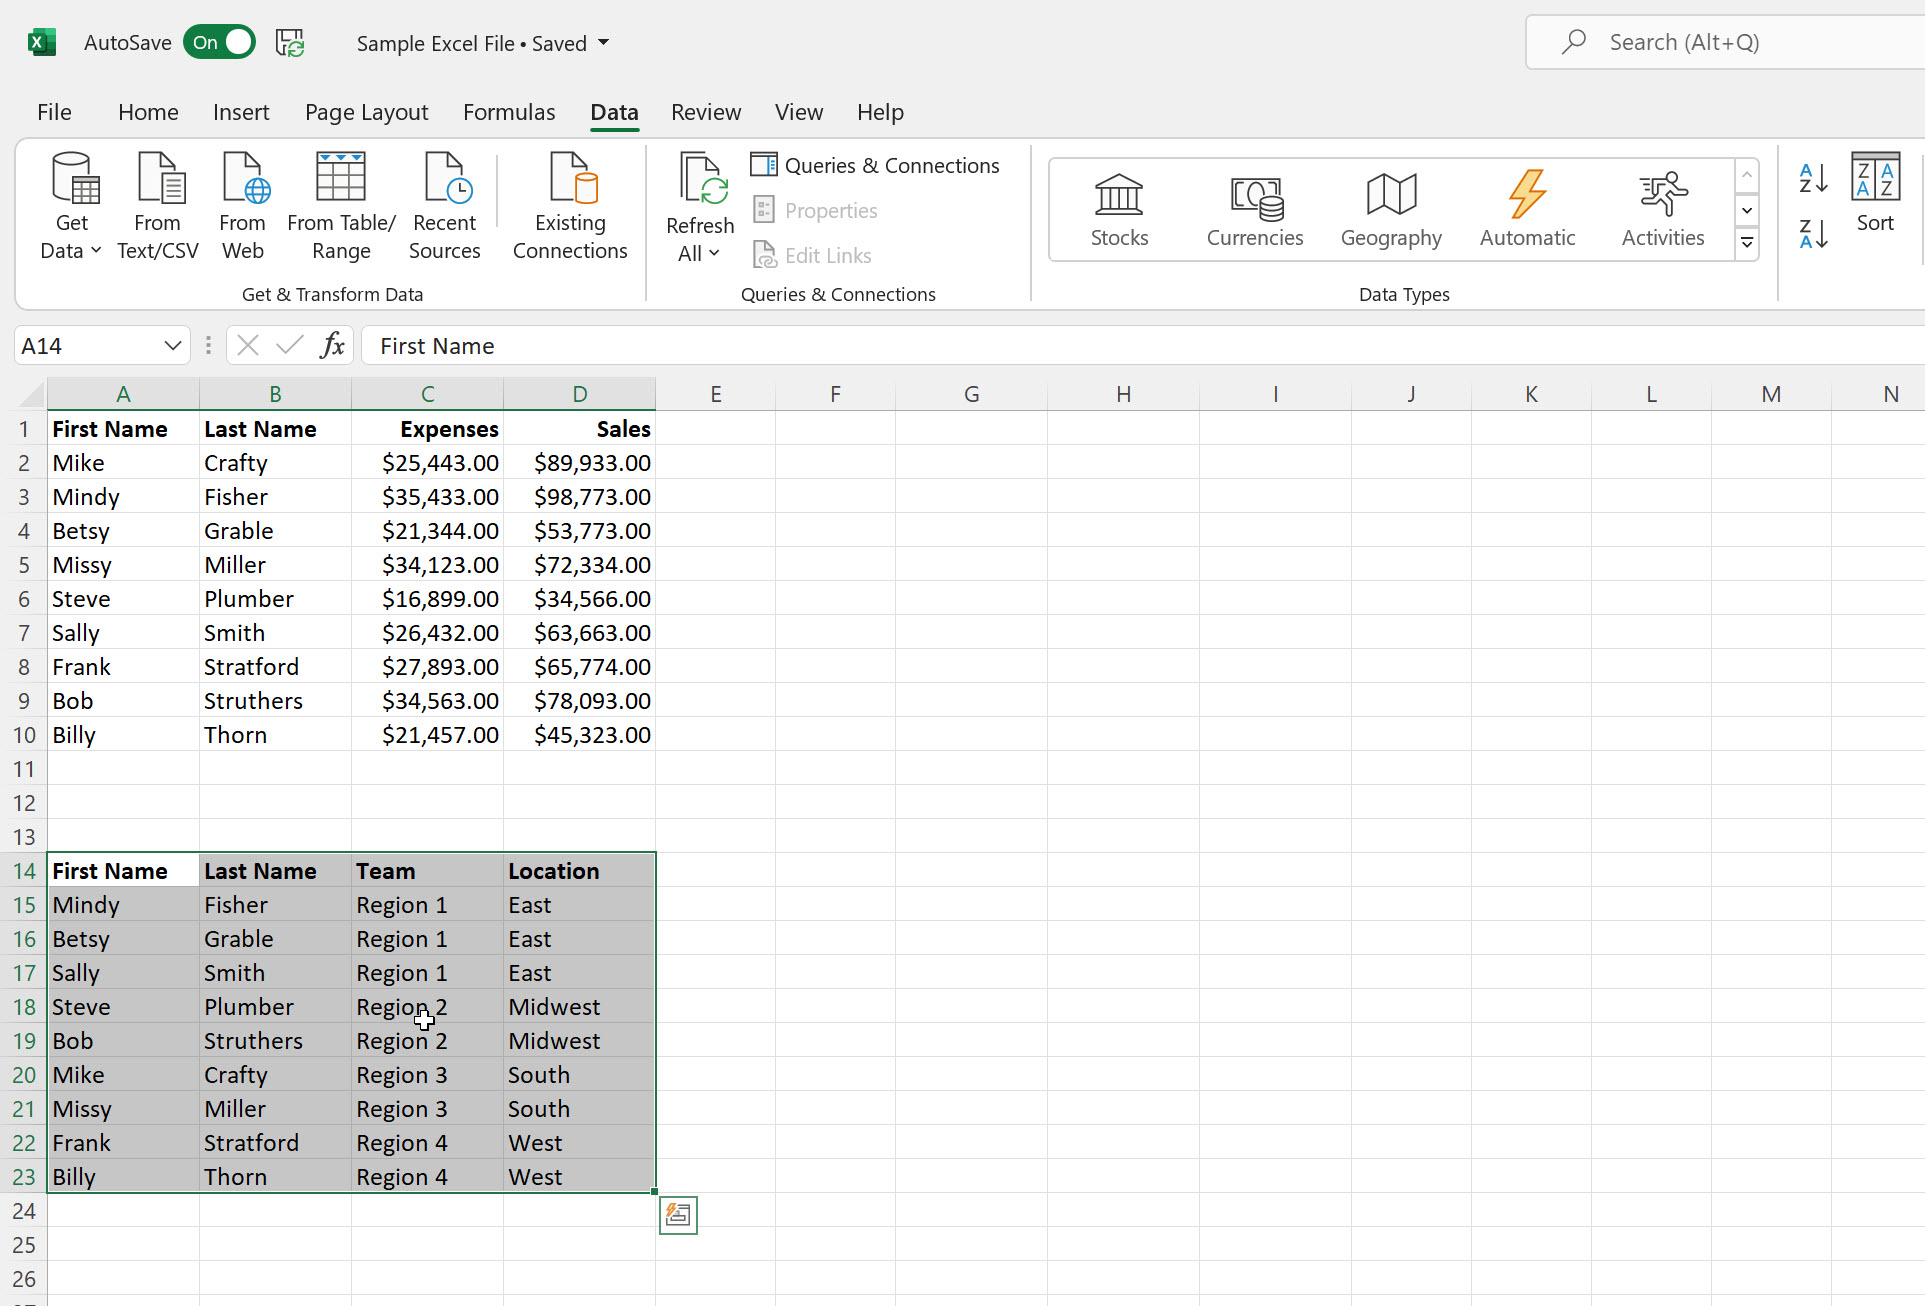 How to alphabetize data in an Excel spreadsheet